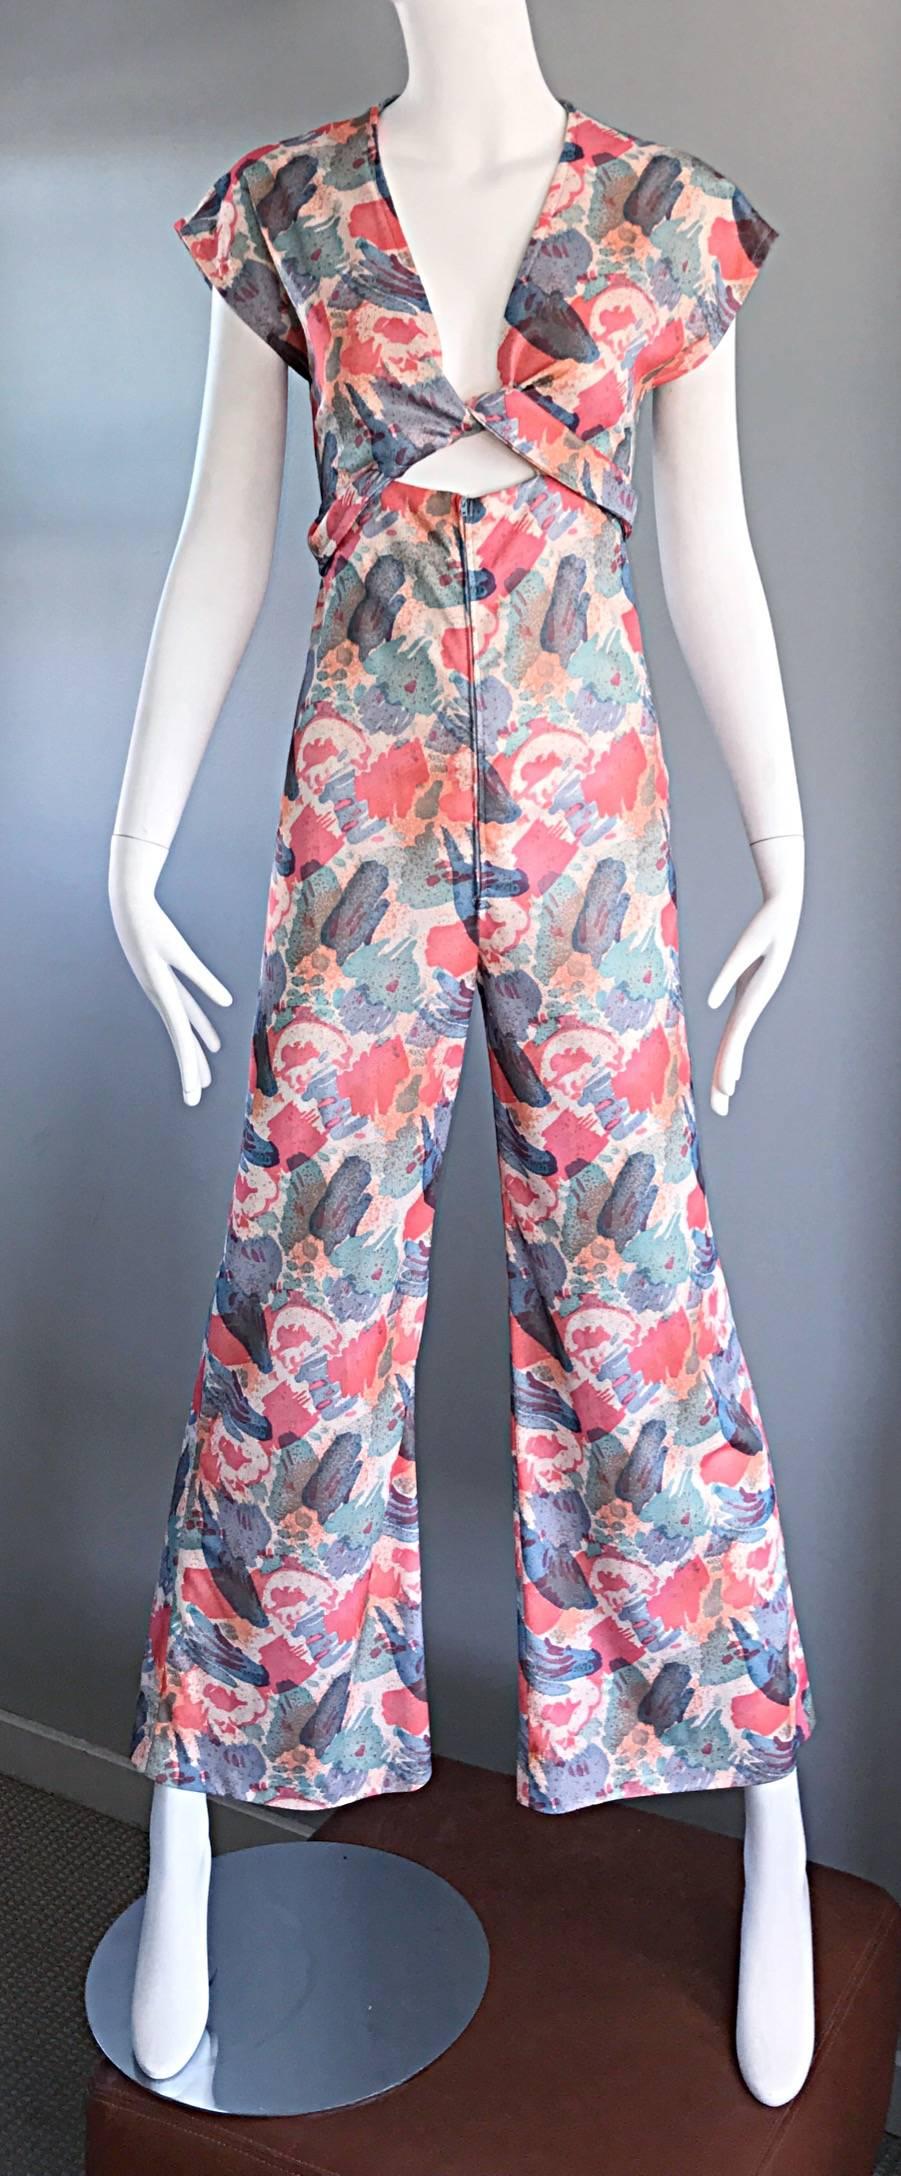 Smashing 1970s abstract cut-out wrap jumpsuit! Features warm hues of pinks, blues, greens, peach and ivory. Flattering cap sleeve, with a. Fitted bodice. Wide flared palazzo pants. Top ties in the back, and can be worn multiple ways. Looks chic with